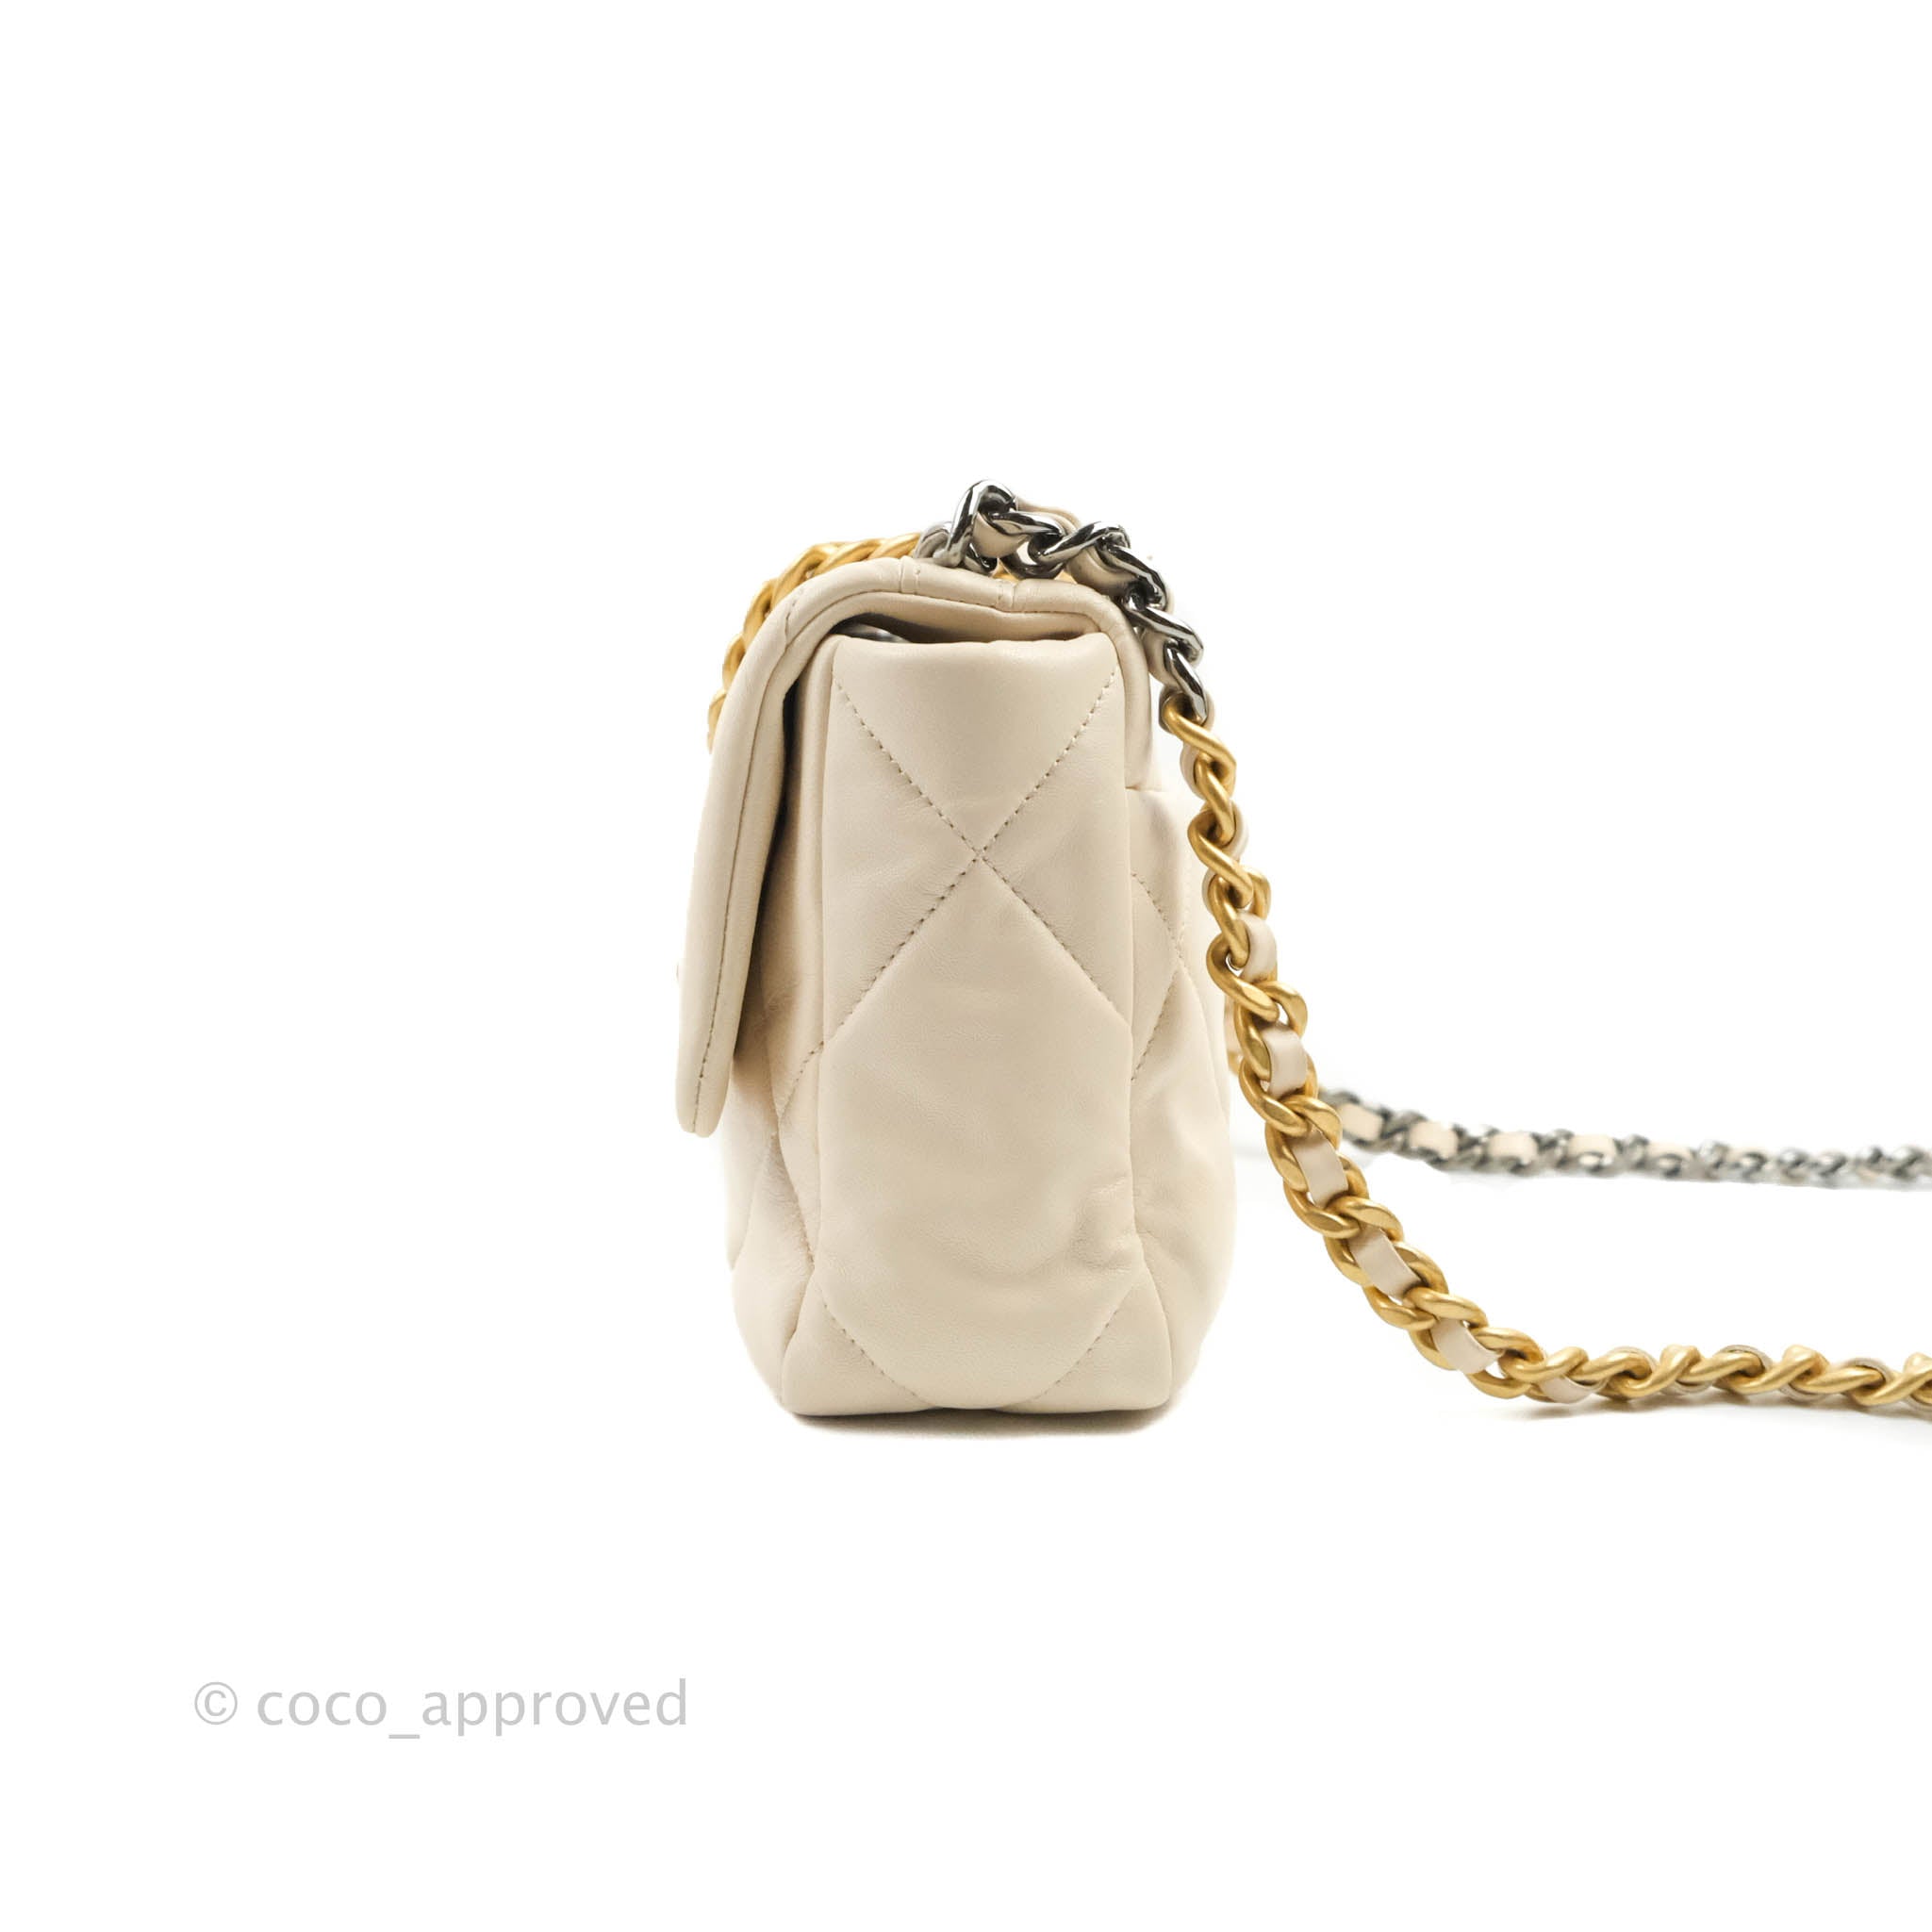 Chanel 19 Bag Small Nude – Tailored Styling